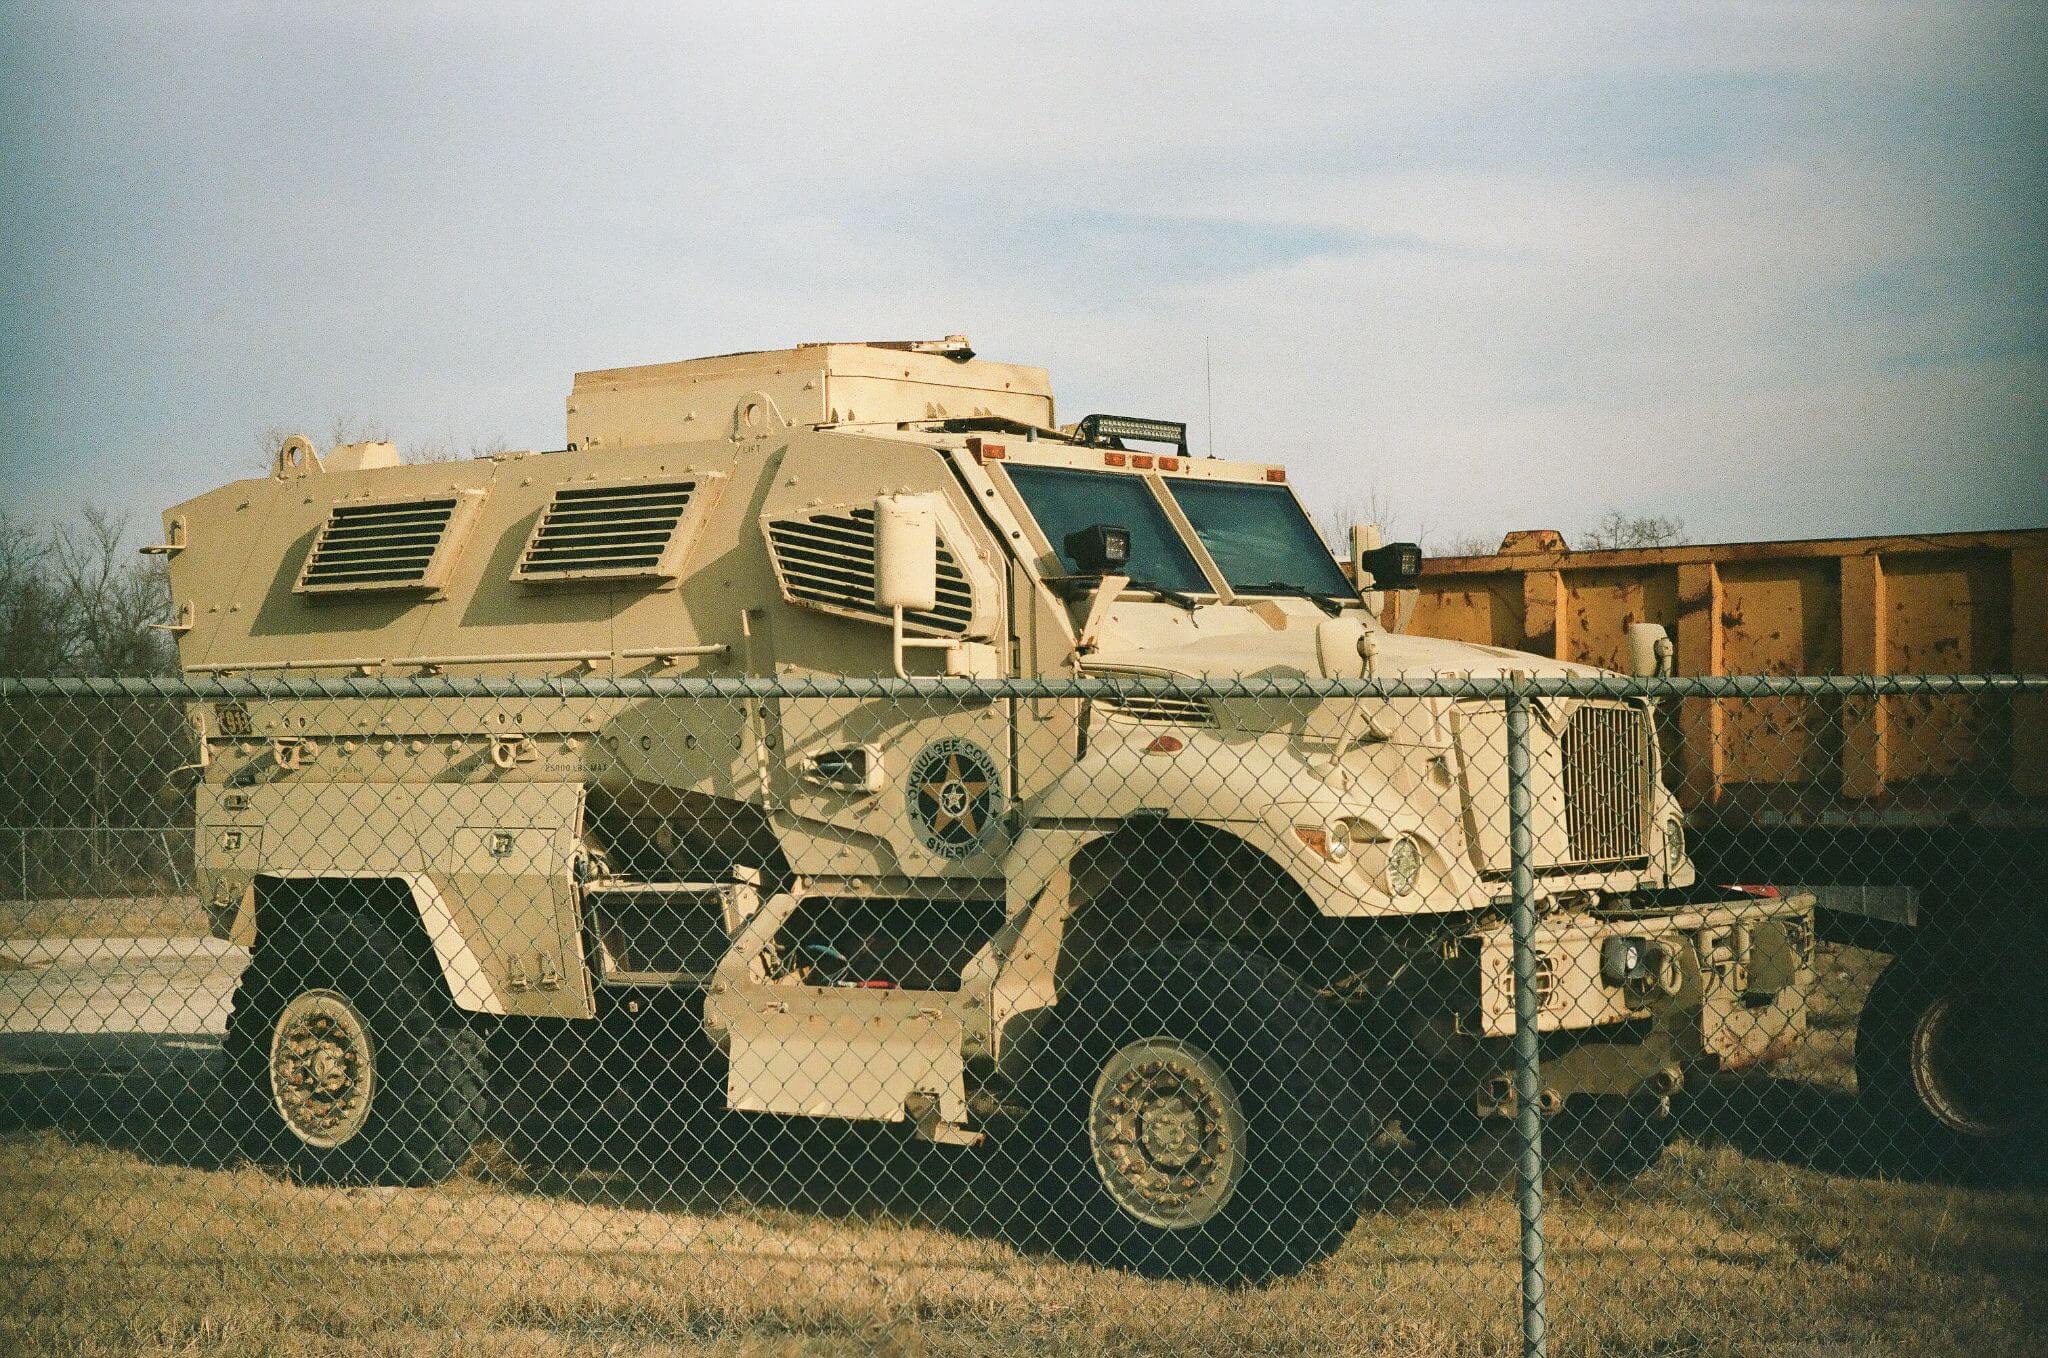 manufactured armored vehicle in california